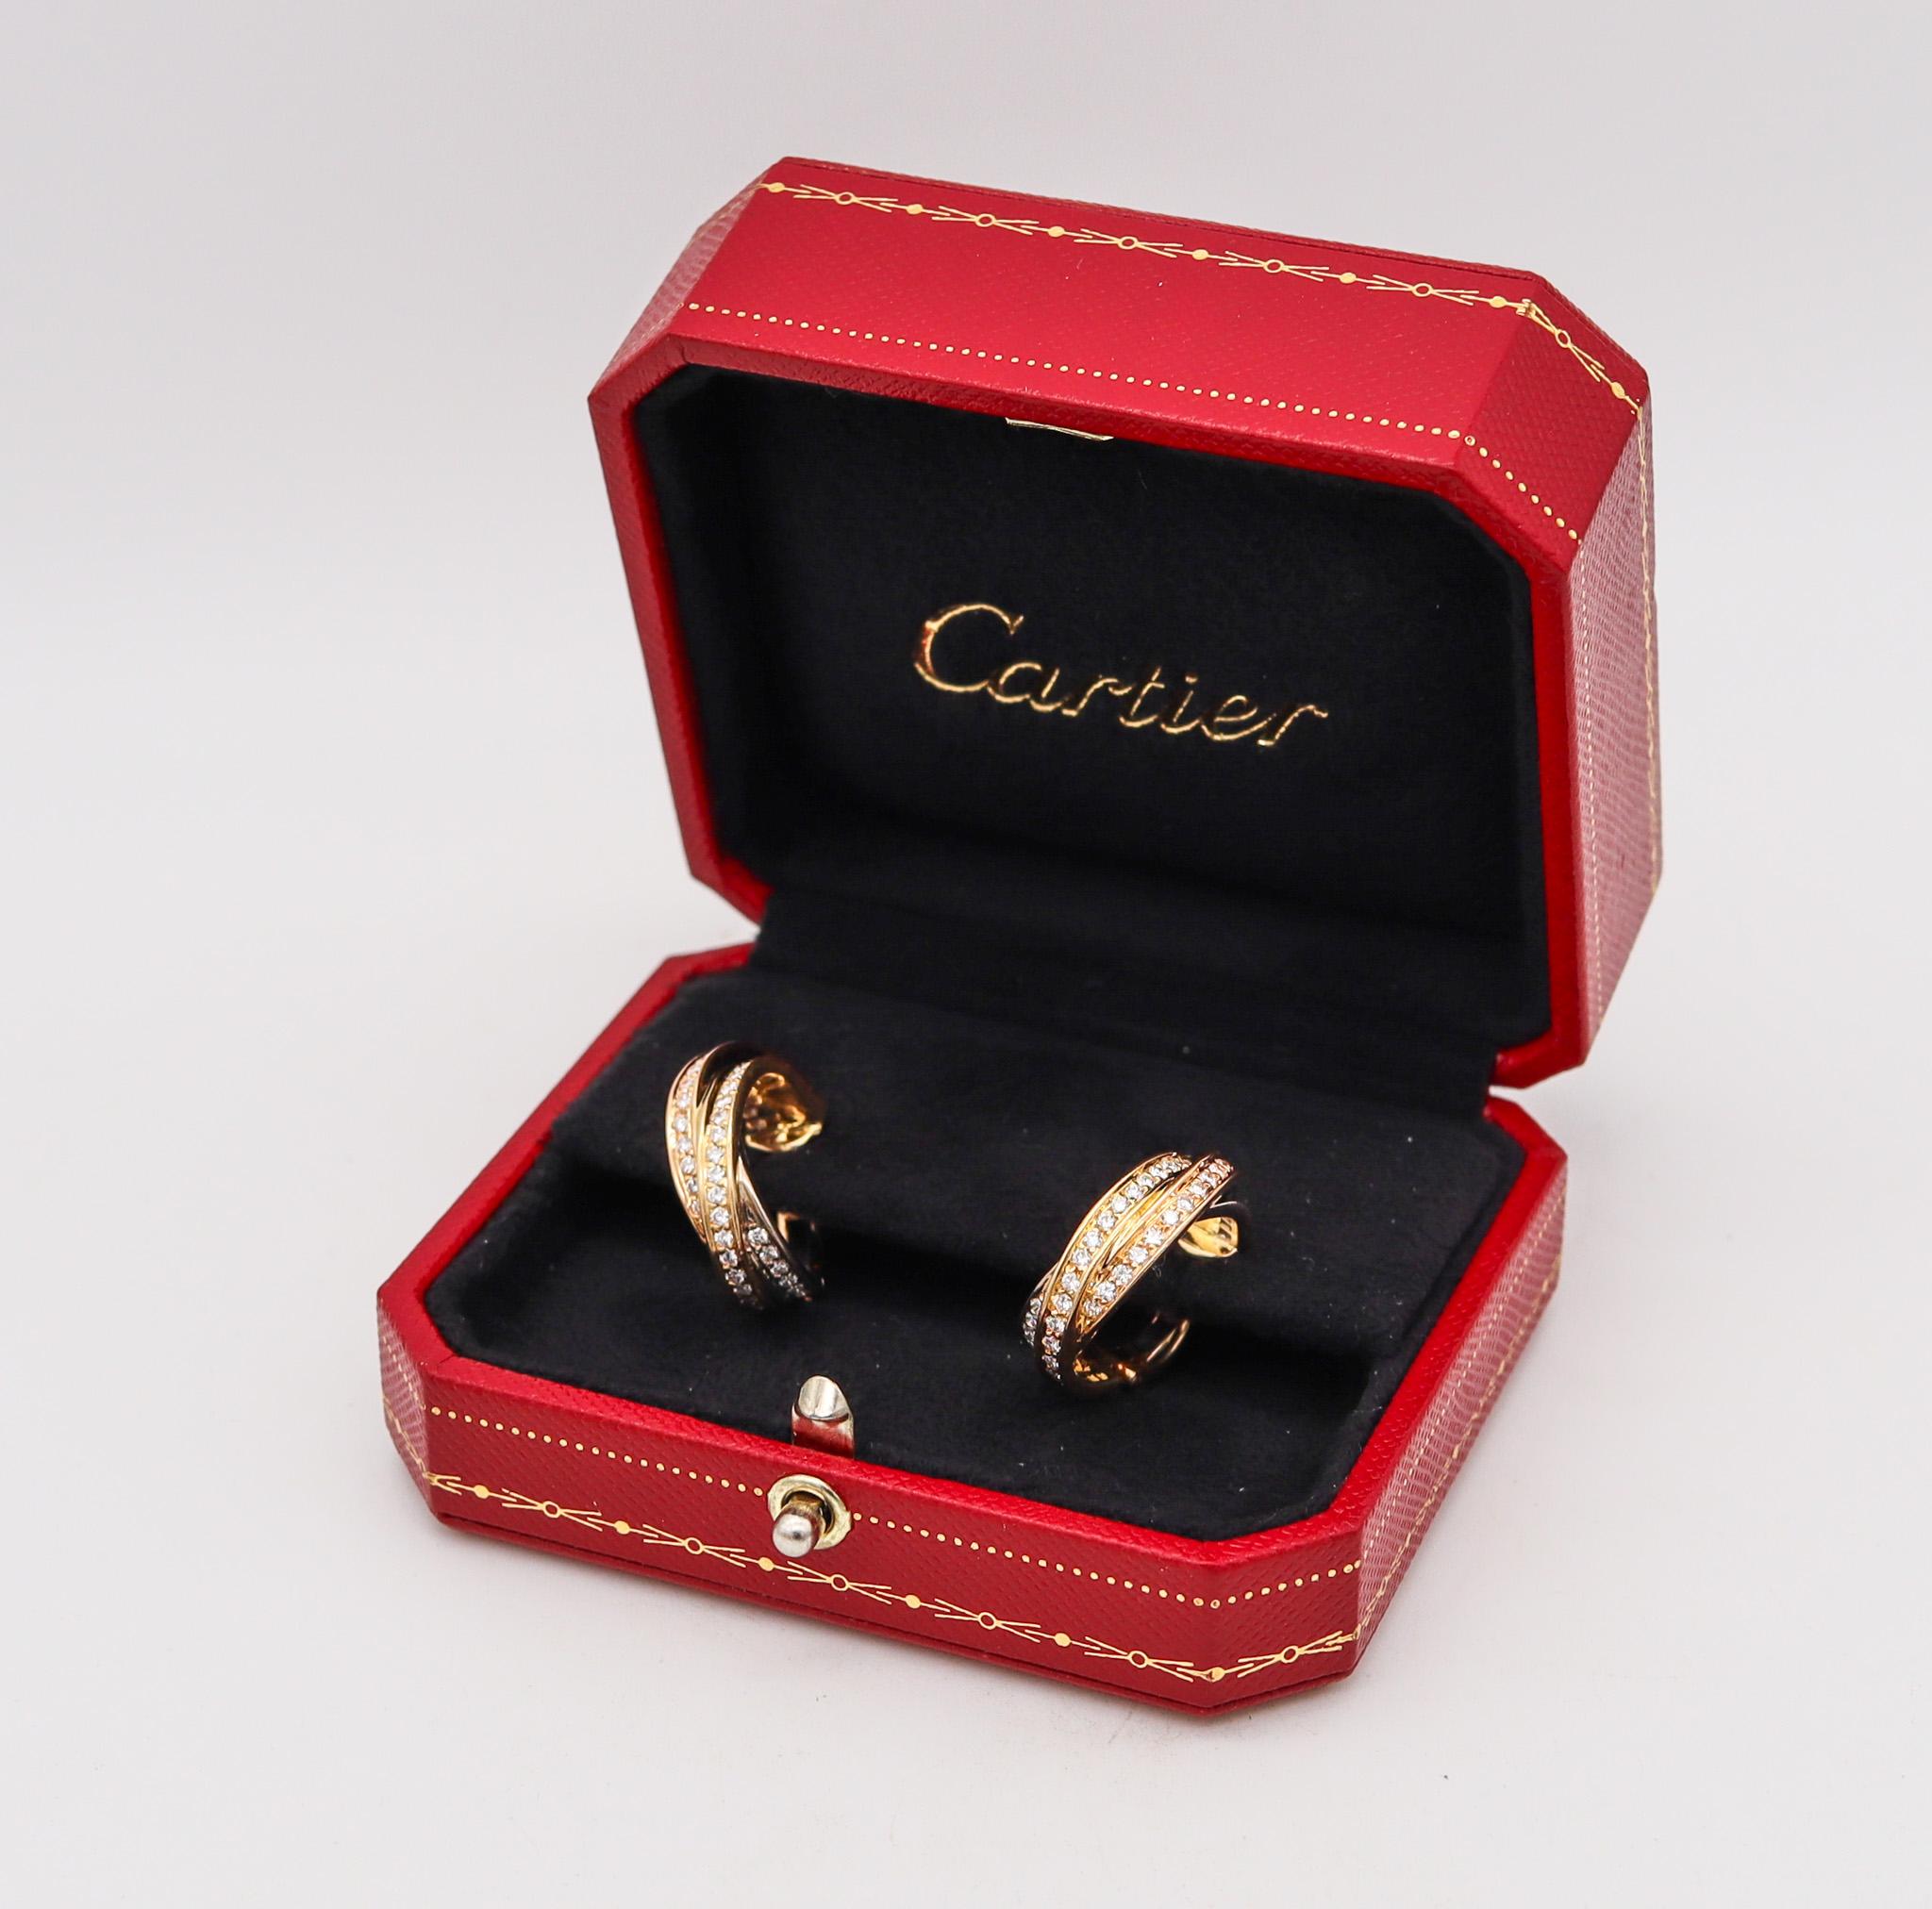 Trinity hoops earrings designed by Cartier.

Beautiful everyday pair of earrings, created in Paris France by the jewelry house of Cartier. These iconic hoop earrings has been crafted in three colors of 18 karats, with high polished finish. They are